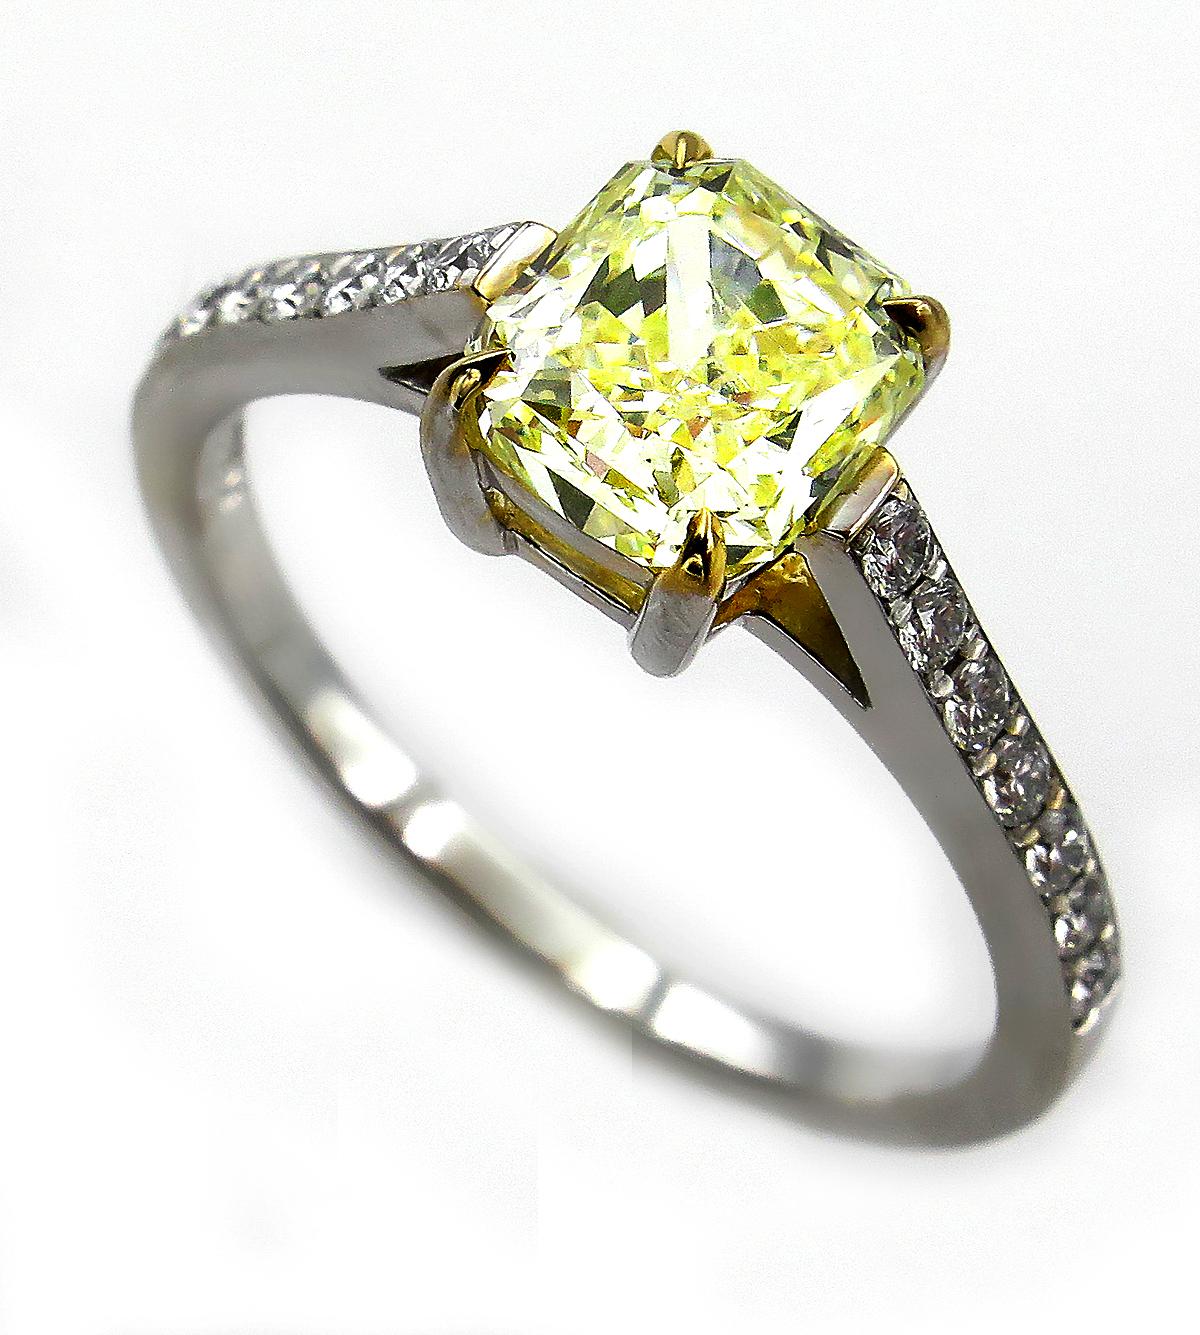 GIA 1.98 Carat Fancy Yellow Radiant Cut Diamond Solitaire Platinum Ring In Good Condition For Sale In New York, NY